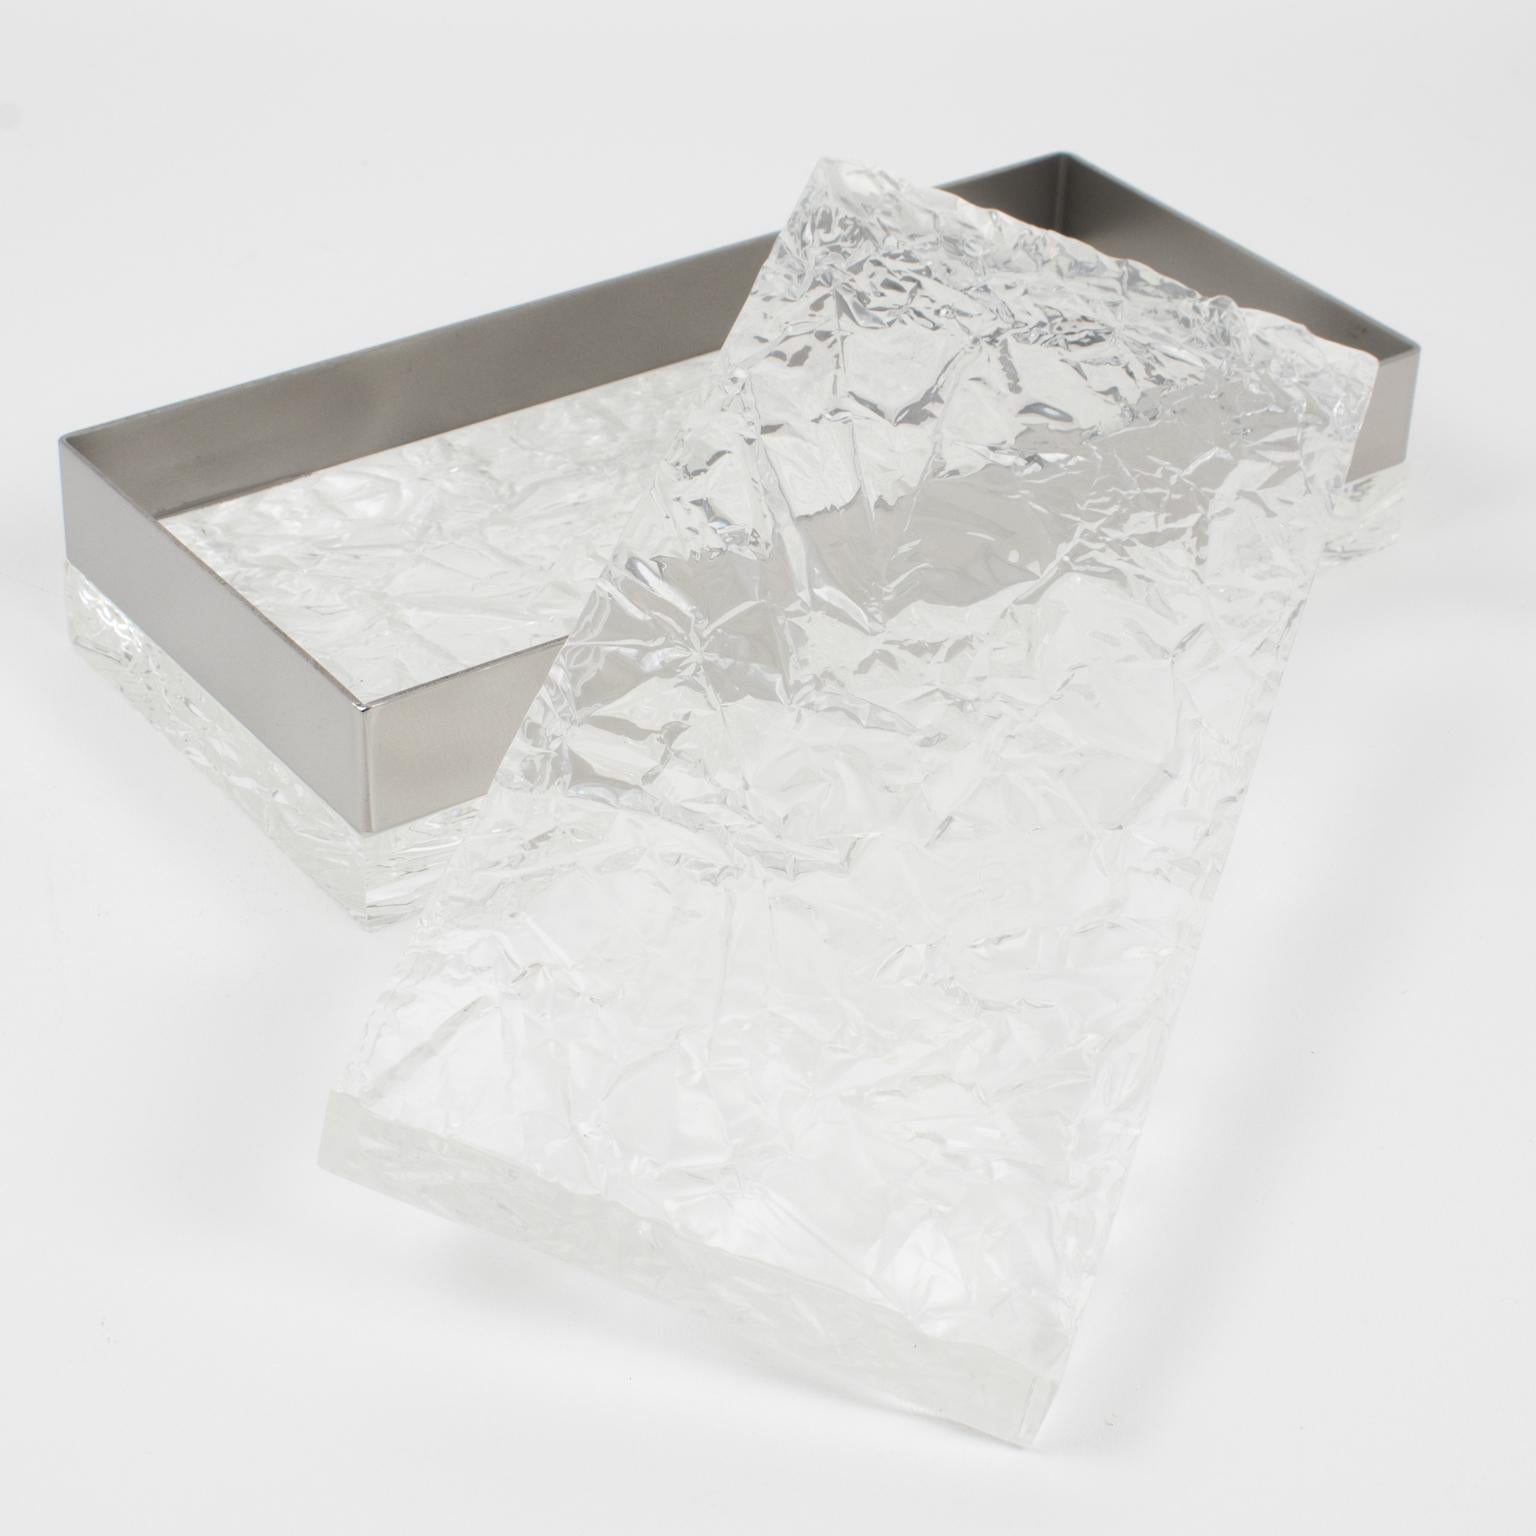 Italian Willy Rizzo Style Ice Effect Lucite and Chrome Decorative Box, 1970s For Sale